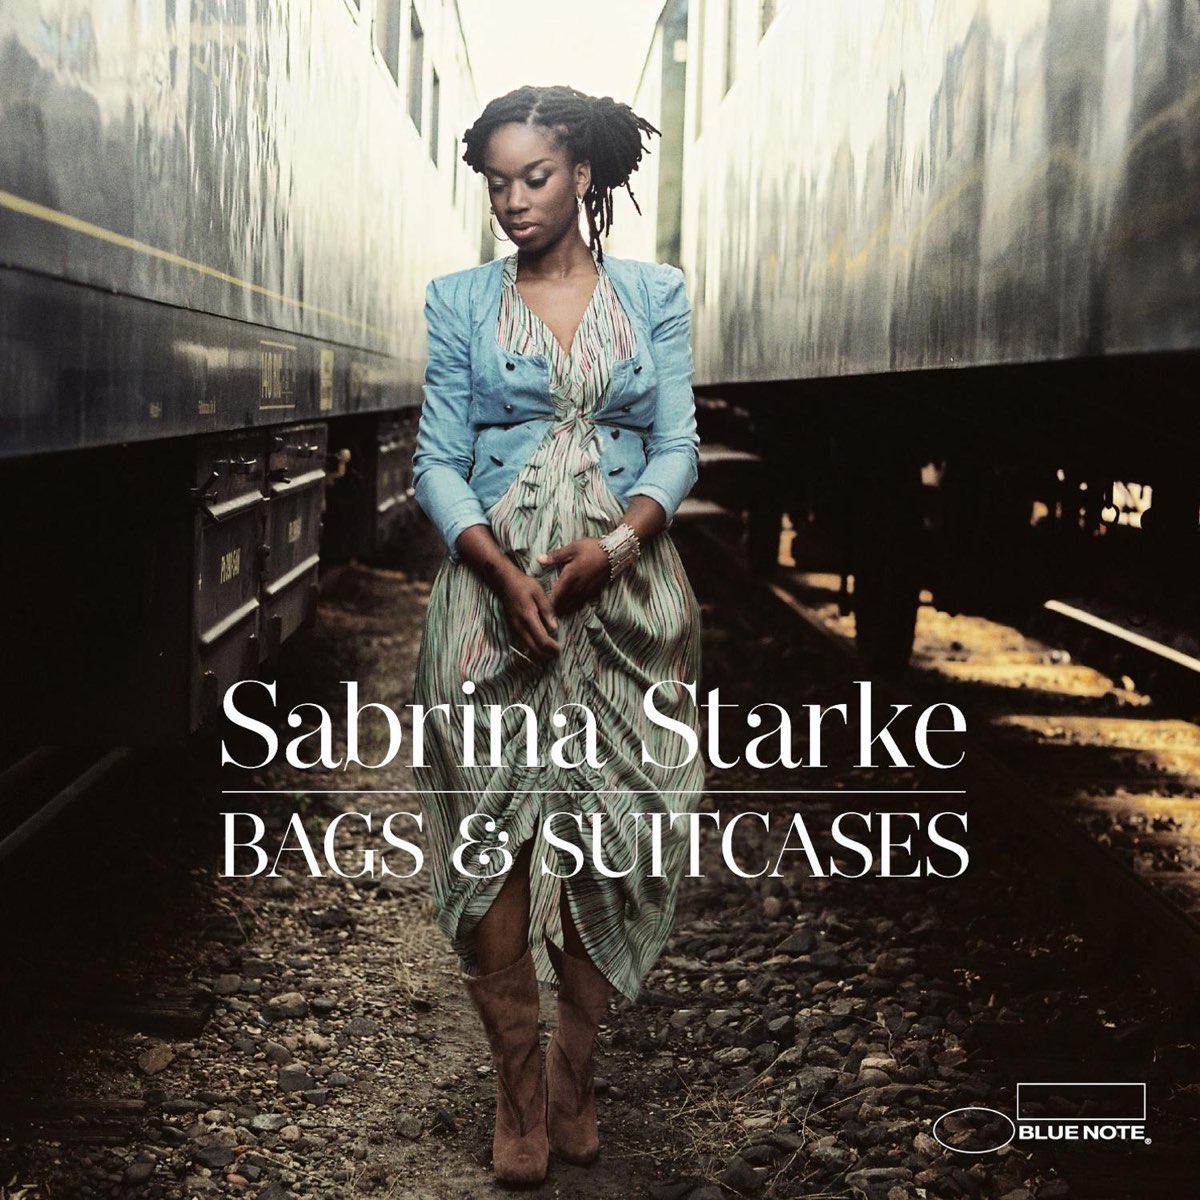 Bags & Suitcases - Album by Sabrina Starke - Apple Music